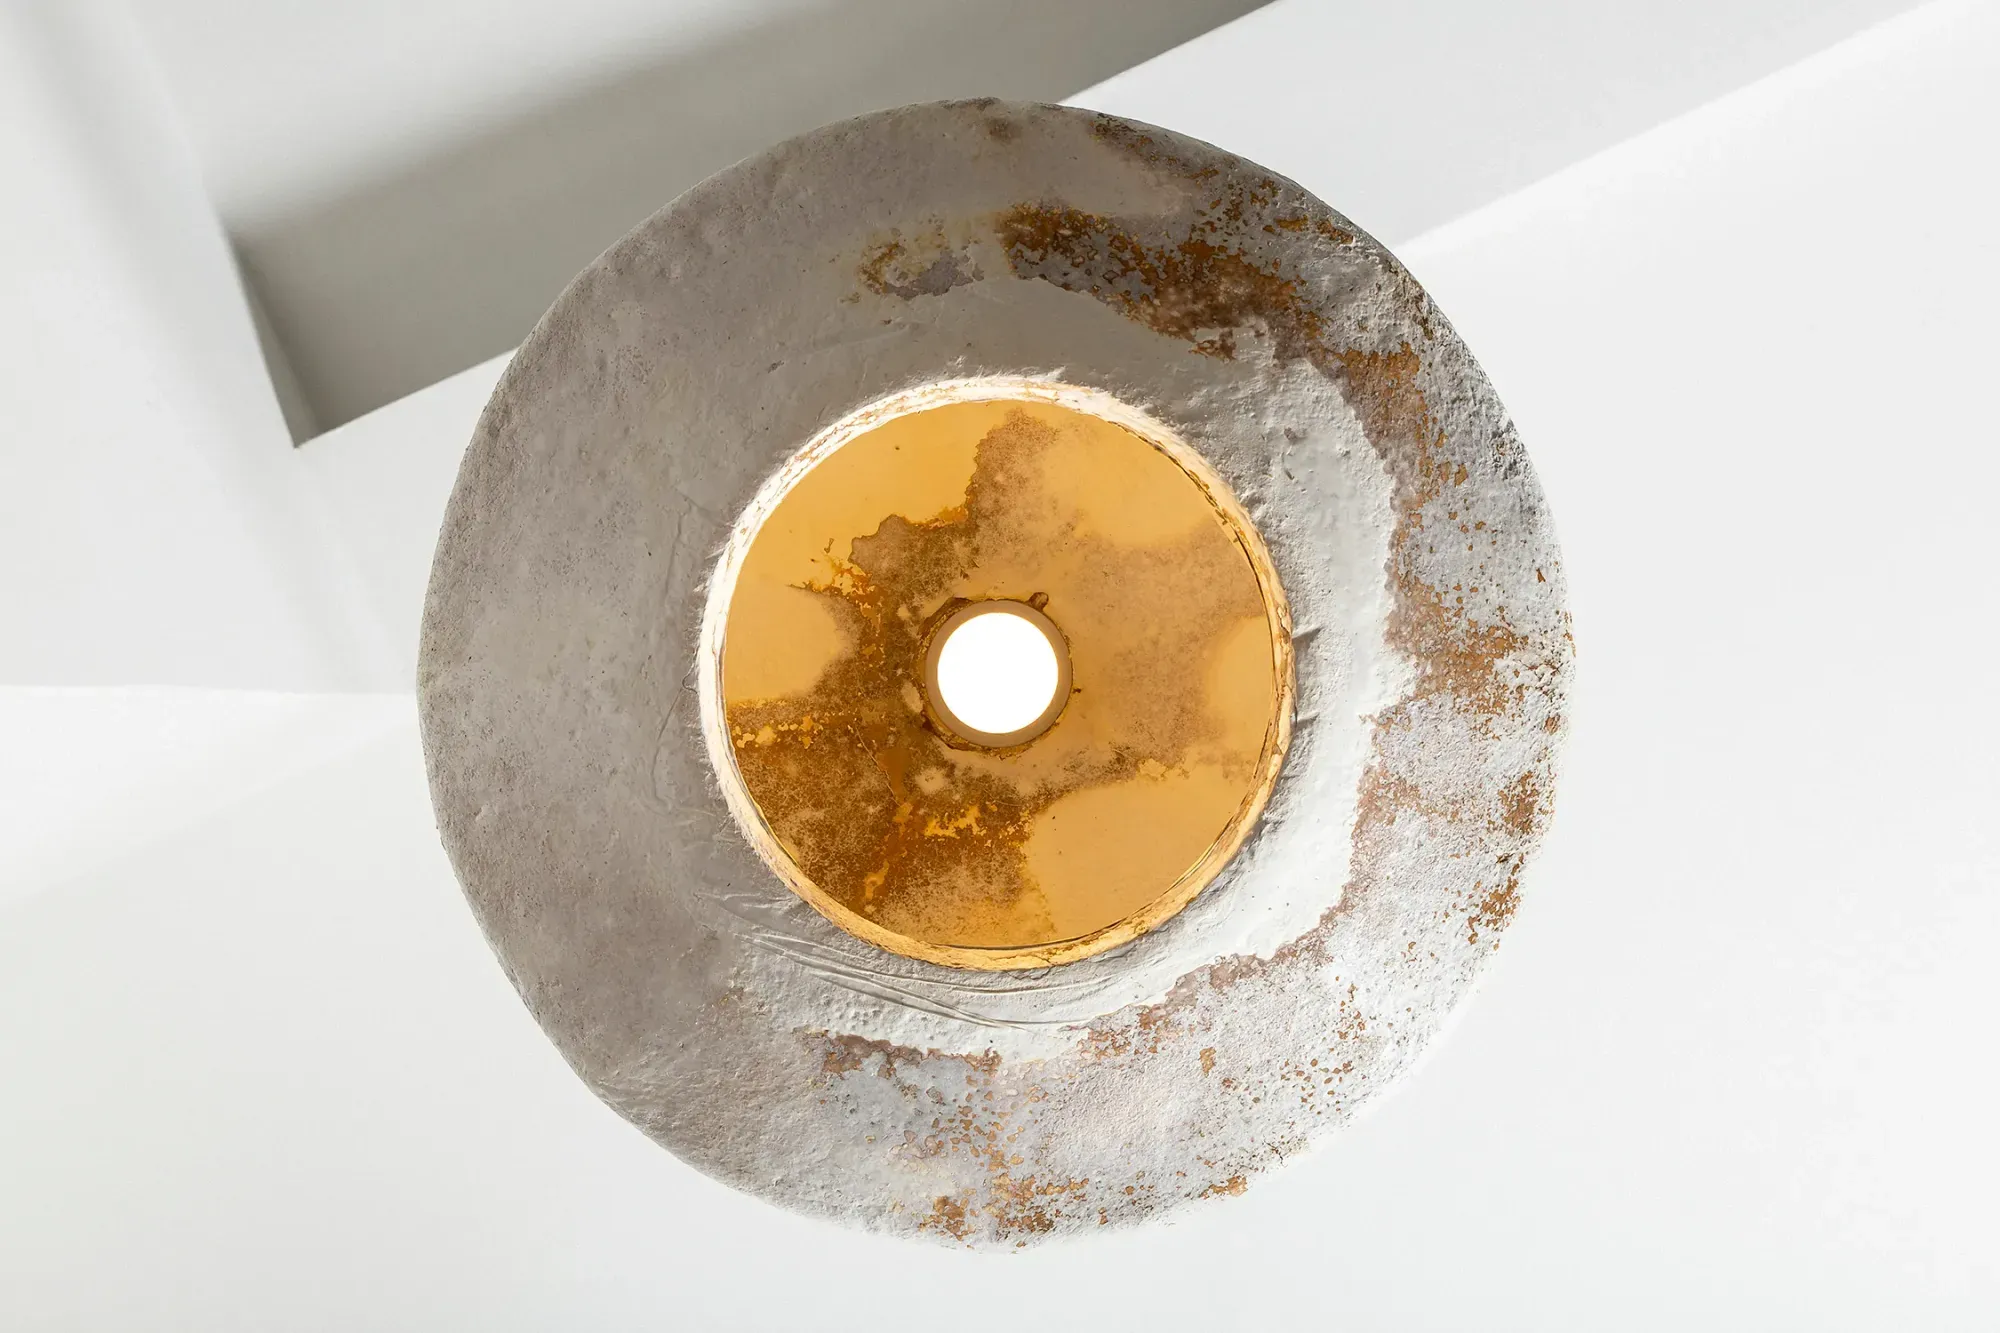 A lampshade grown from mycelium could light up future’s everydays